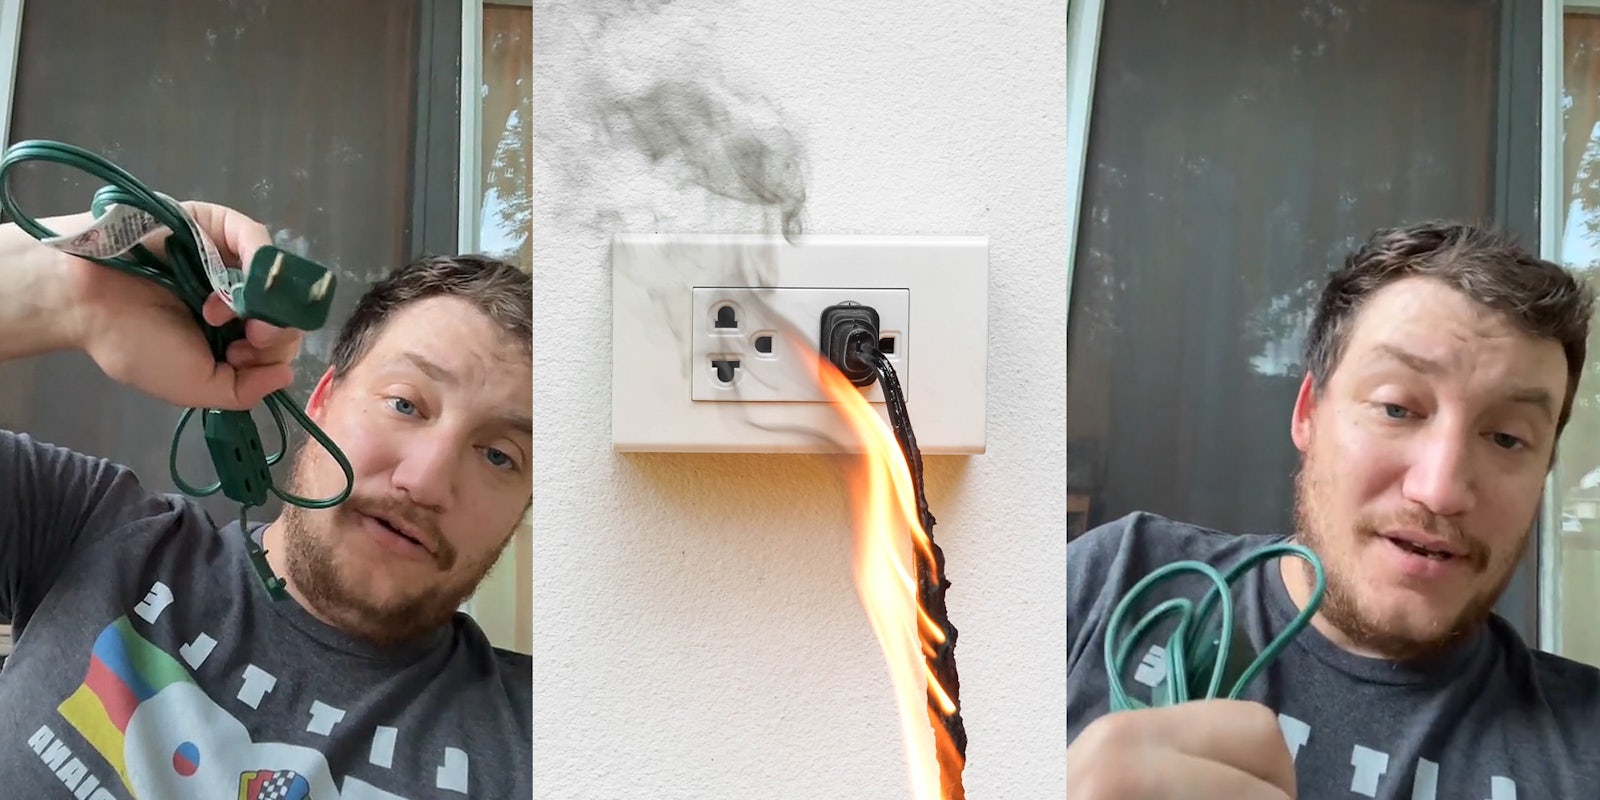 https://uploads.dailydot.com/2022/06/electrician-says-dont-buy-these-extension-chords-from-walmart-because-they-cause-lots-of-fires.jpg?q=65&auto=format&w=1600&ar=2:1&fit=crop